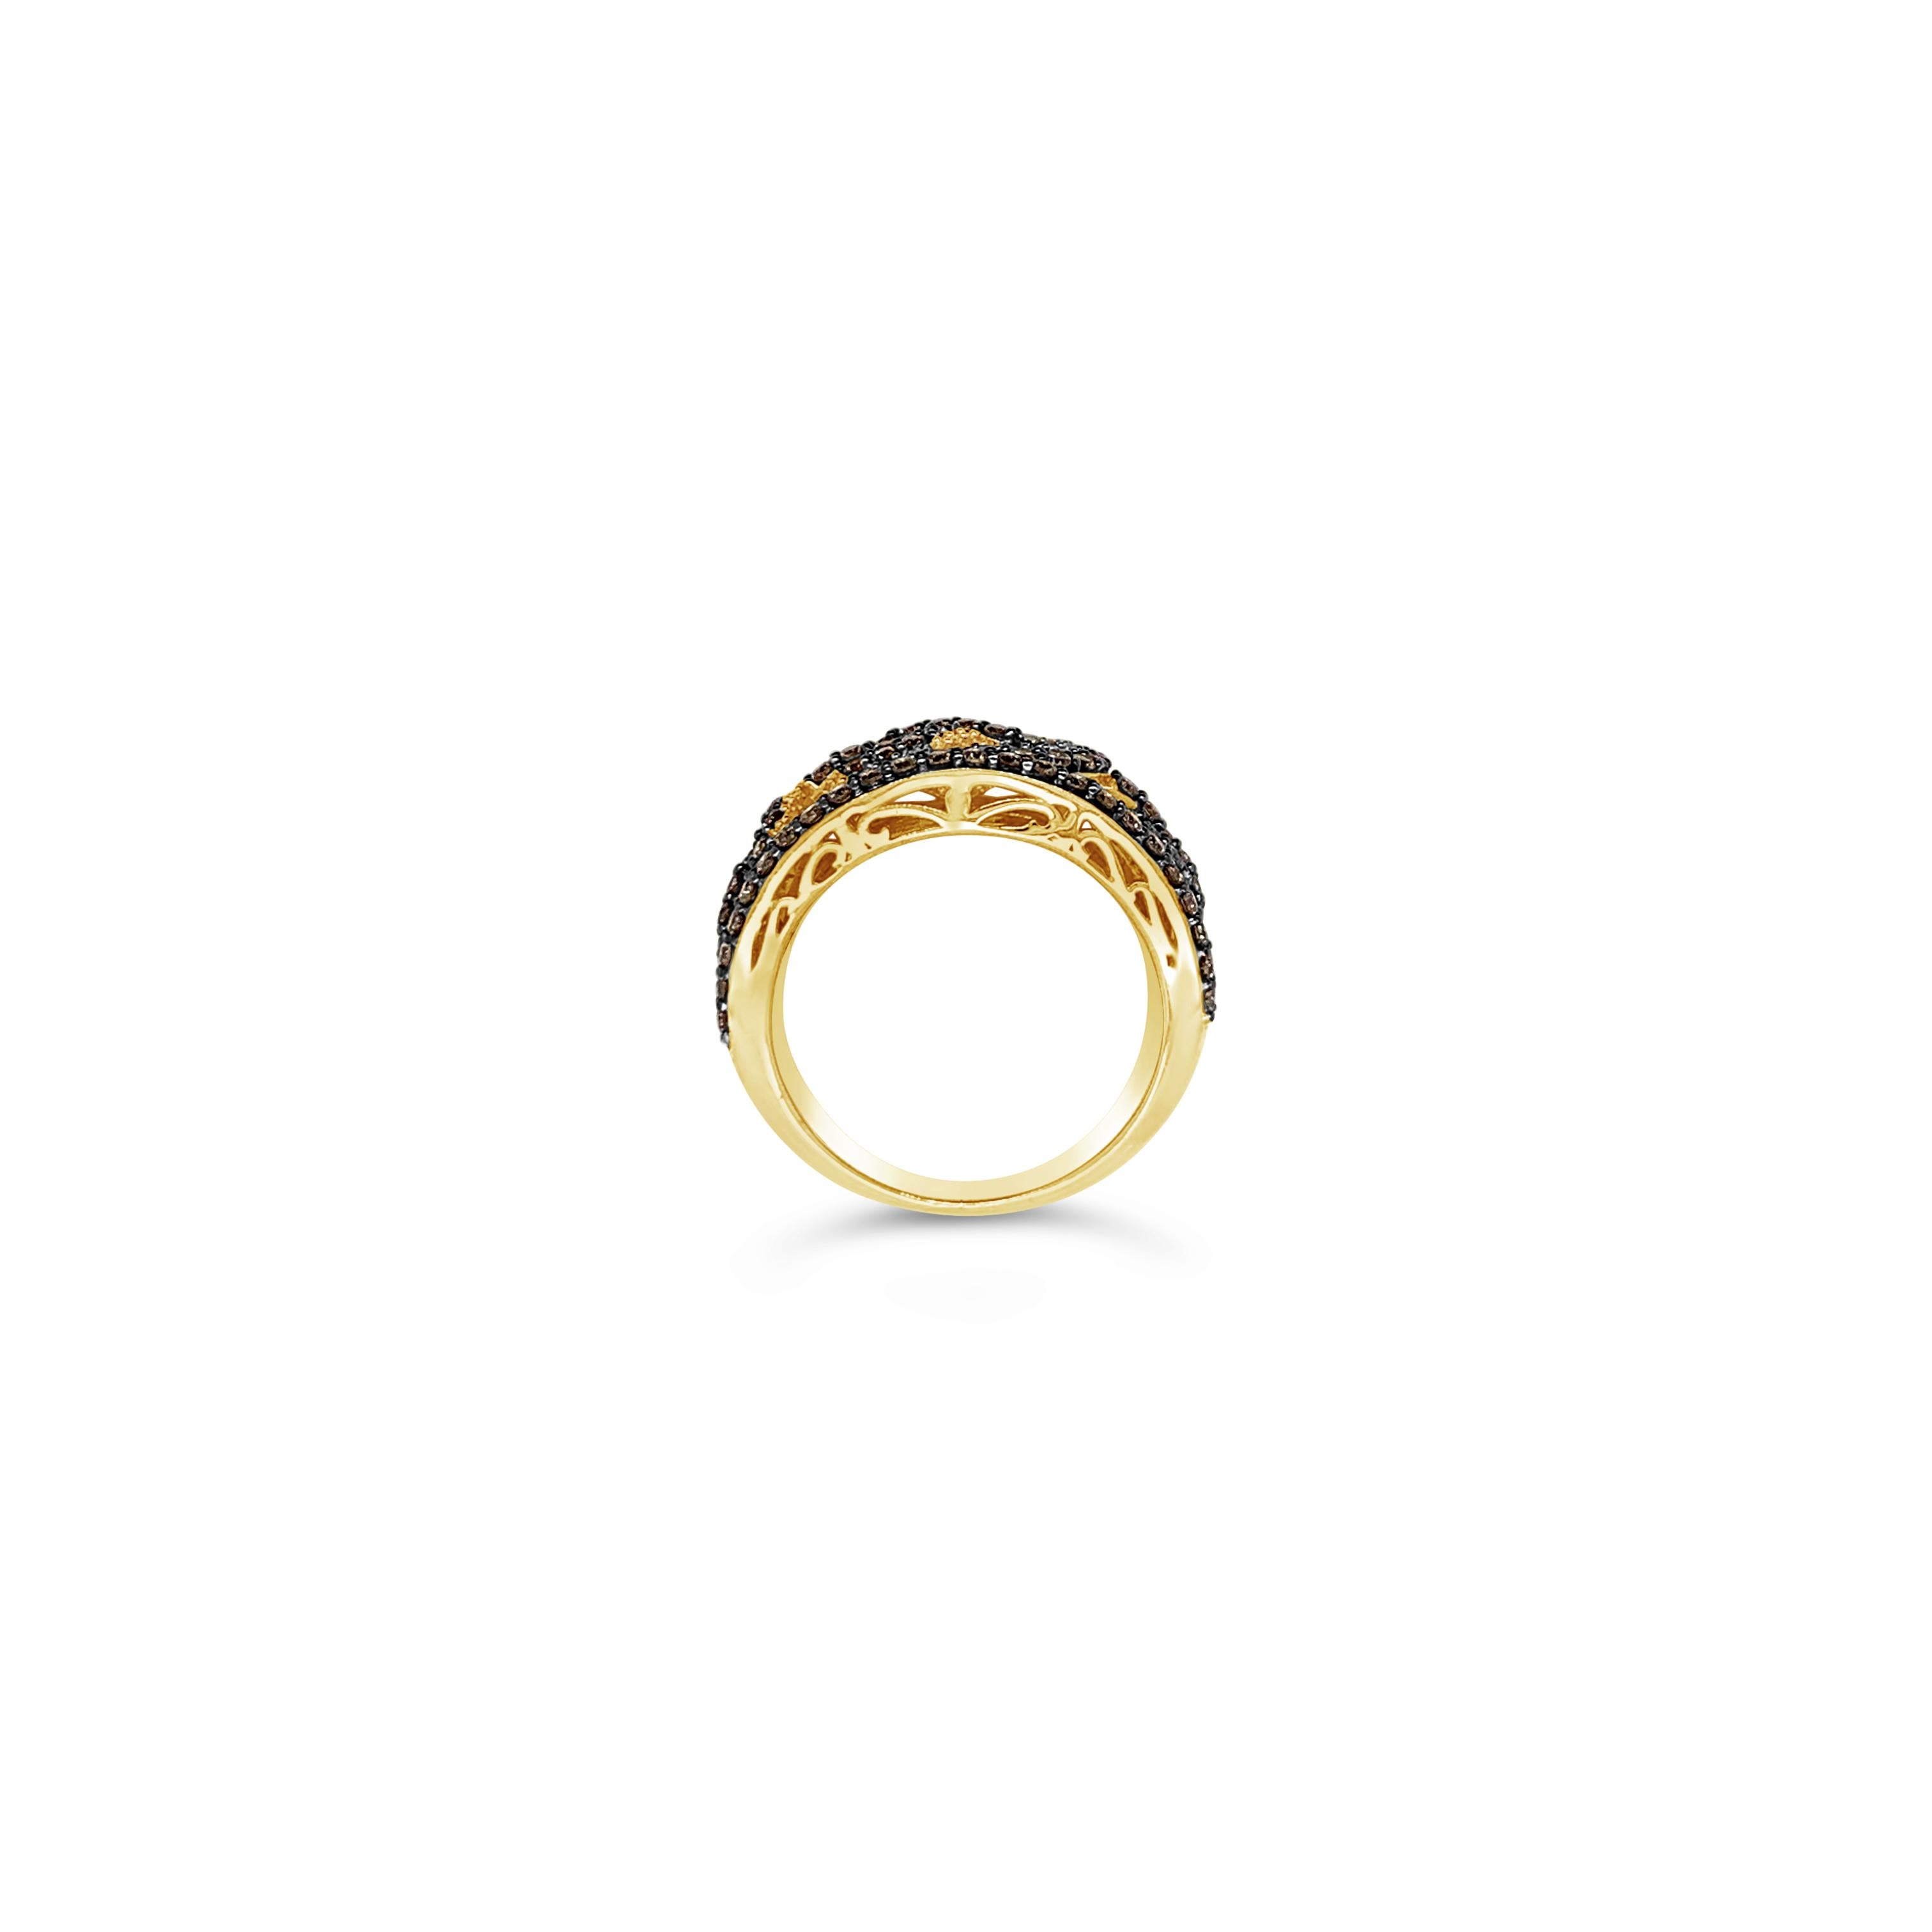 Le Vian Chocolatier® Ring featuring 1.21 cts. Chocolate Diamonds®, .31 cts. Vanilla Diamonds® set in 14K Honey Gold™

Diamonds Breakdown:
1.21 cts Brown Diamonds
.31 cts White Diamonds

Gems Breakdown:
None

Ring may or may not be sizable, please